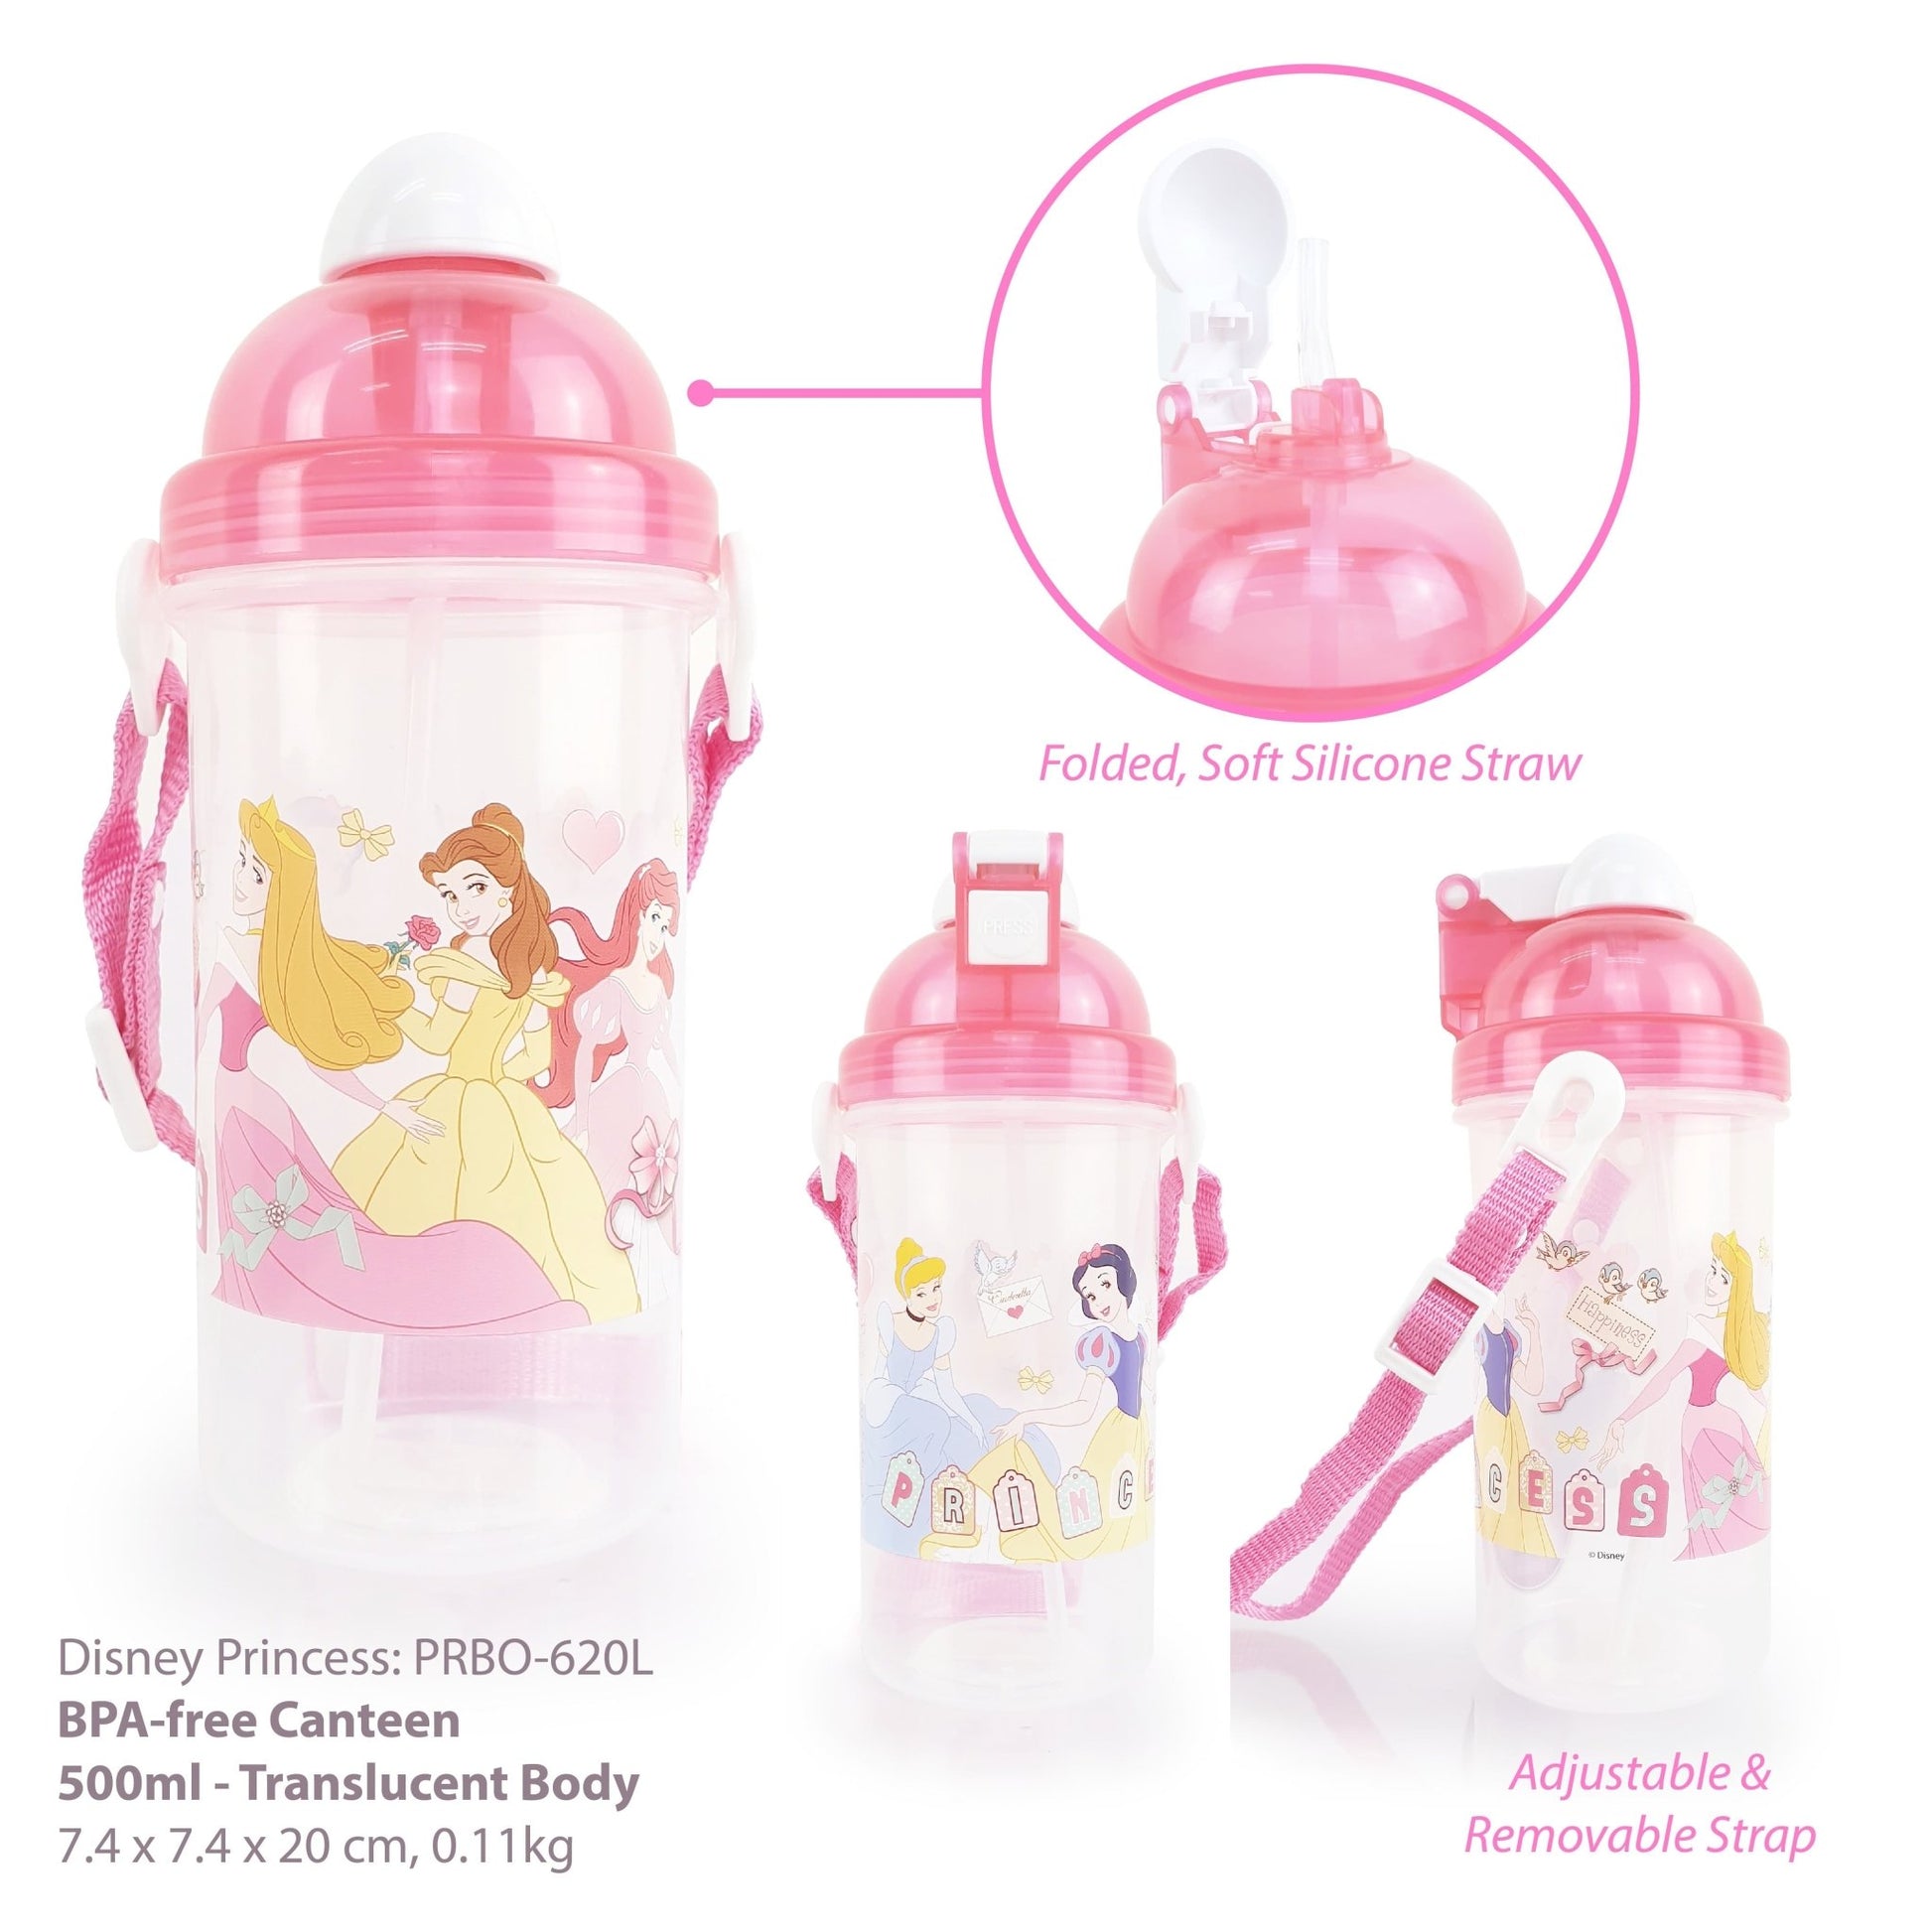 Disney Princess - Pop-up Straw Canteen Water Bottle with Adjustable Strap (BPA-free) - Simply Life